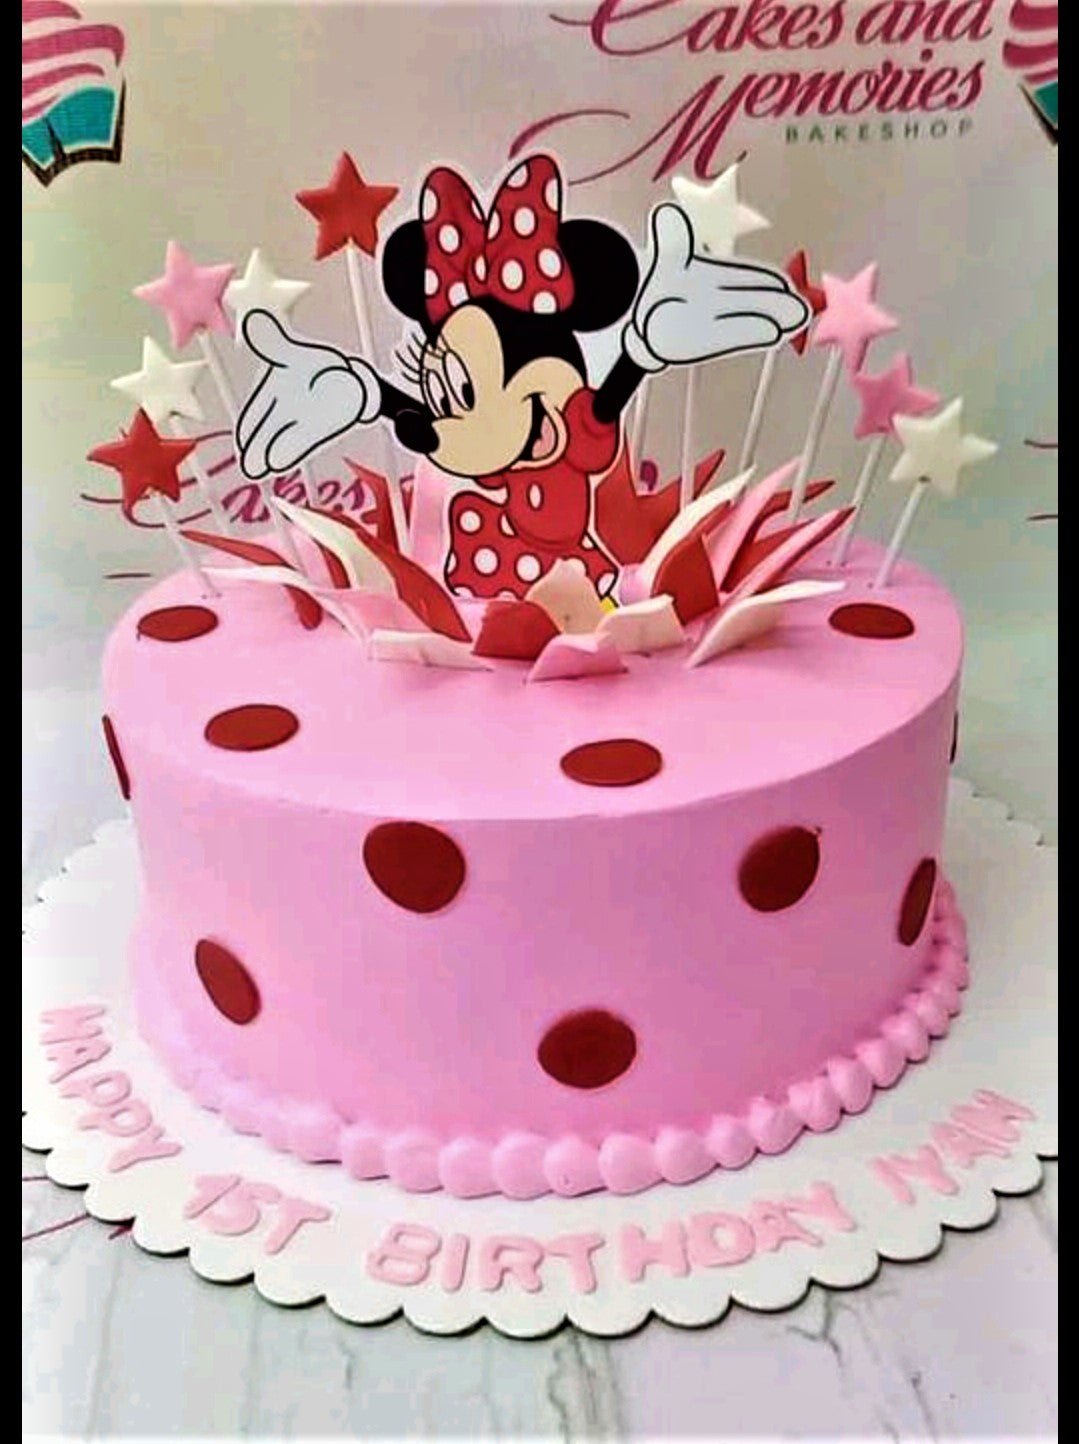 Beautiful Minnie Mouse 12th Birthday Cake - Between The Pages Blog